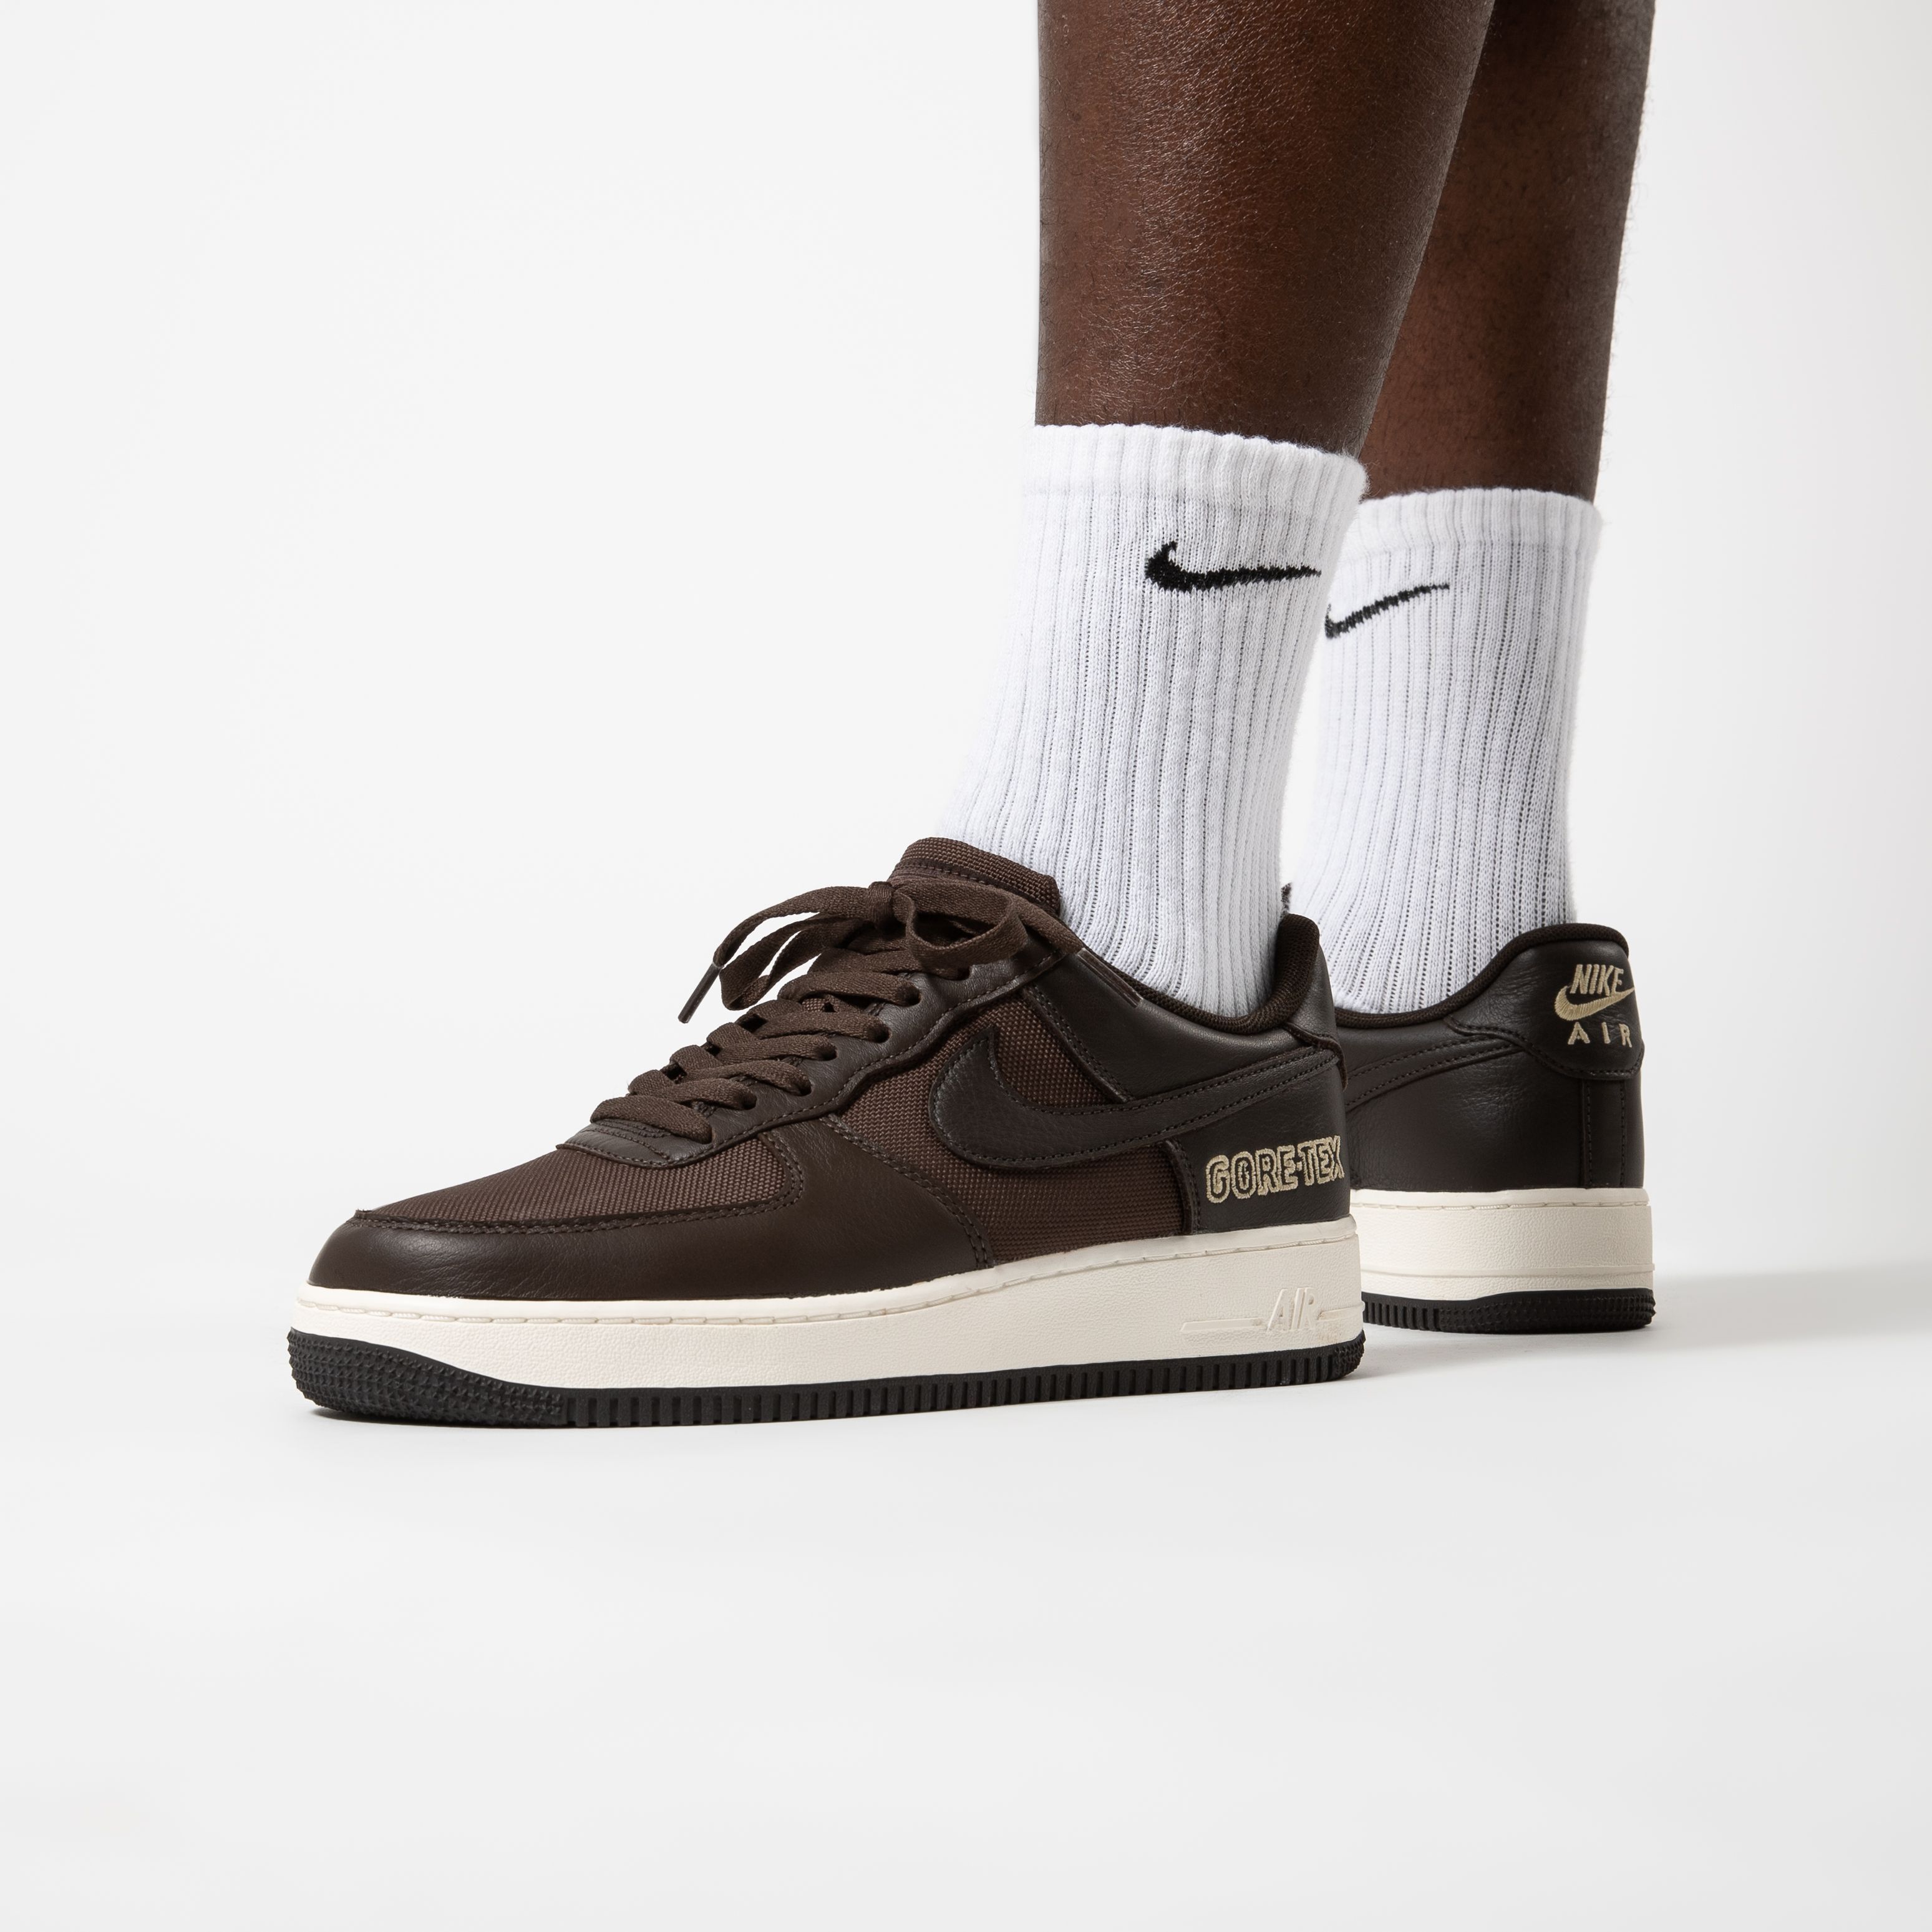 Titolo on Twitter: "NEW 💫 Nike Air Force 1 Gore-Tex Brown" click ➡️ ⁠ US 7 (40) - US 12 (46)⁠ 🔎 CT2858-201⁠ ⁠ #titoloSHOP⁠ #nike #goretex #af1 #airforce1 #